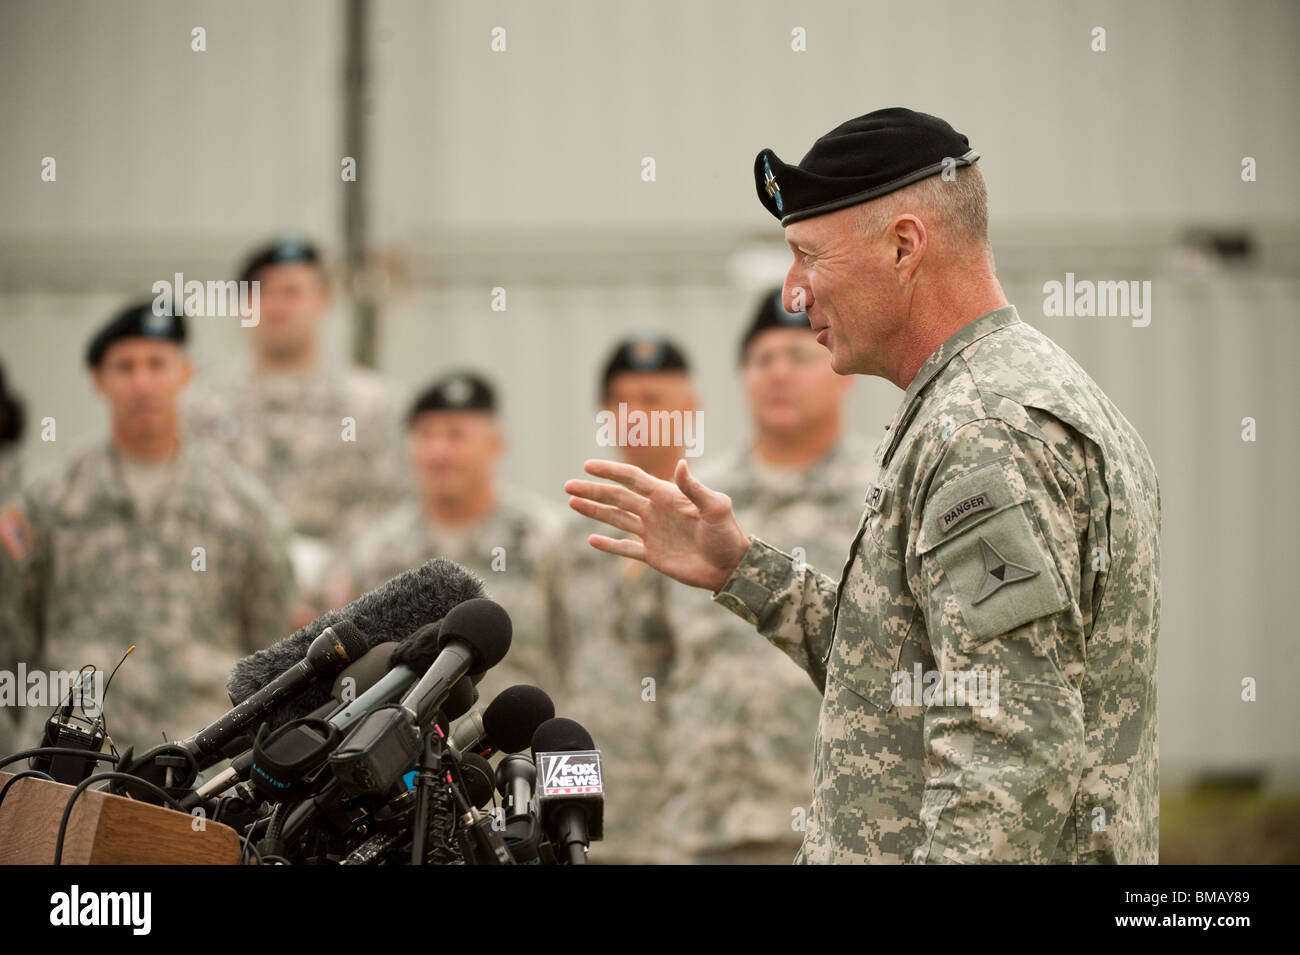 U.S. Army Lt. General Robert Cone speaks to the press after 13 people were killed at Fort Hood, Texas, in November 2009. Stock Photo